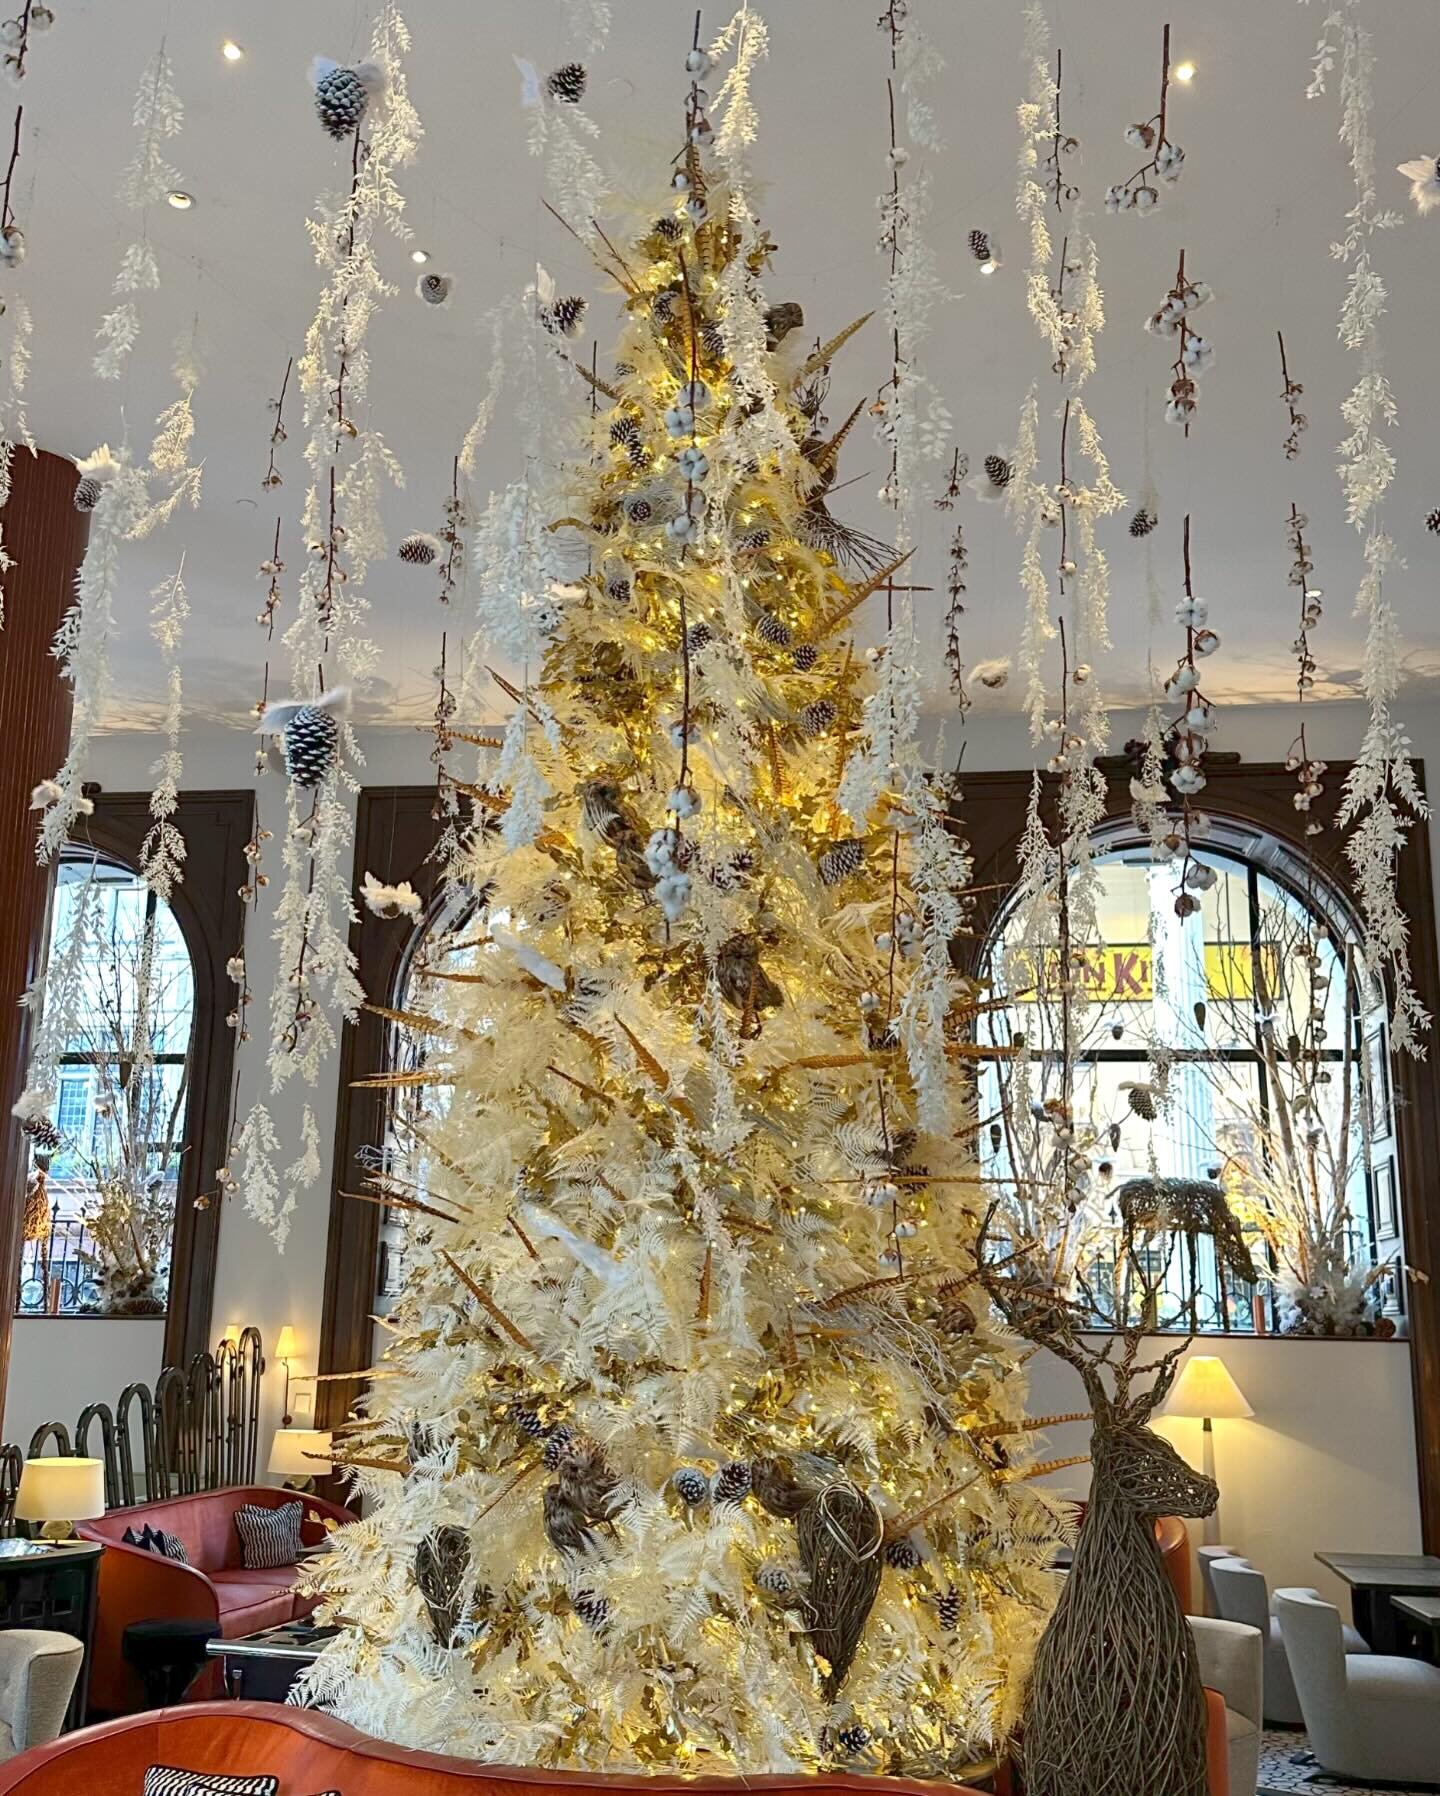 Installation No2 : Working with @mark.at.one on One Aldwych&rsquo;s &ldquo;Enchanted Forest&rdquo;. This is one of the most beautiful Christmas trees in London IMO!!